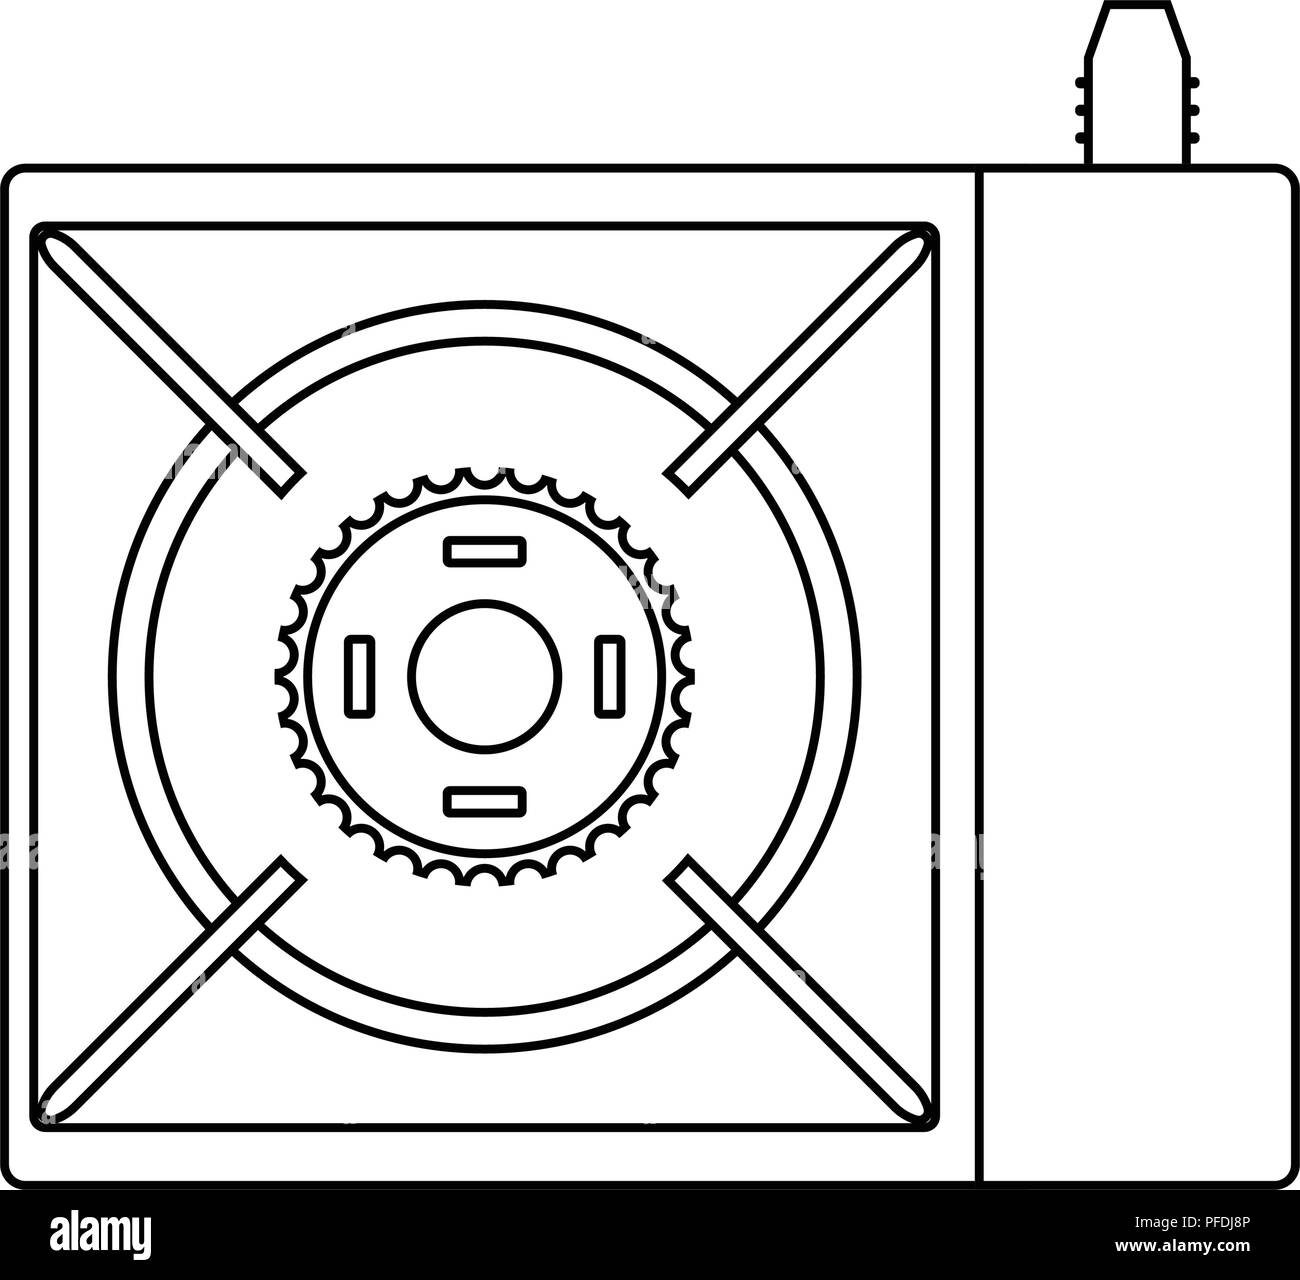 Icon of camping gas burner stove. Thin line design. Vector illustration. Stock Vector